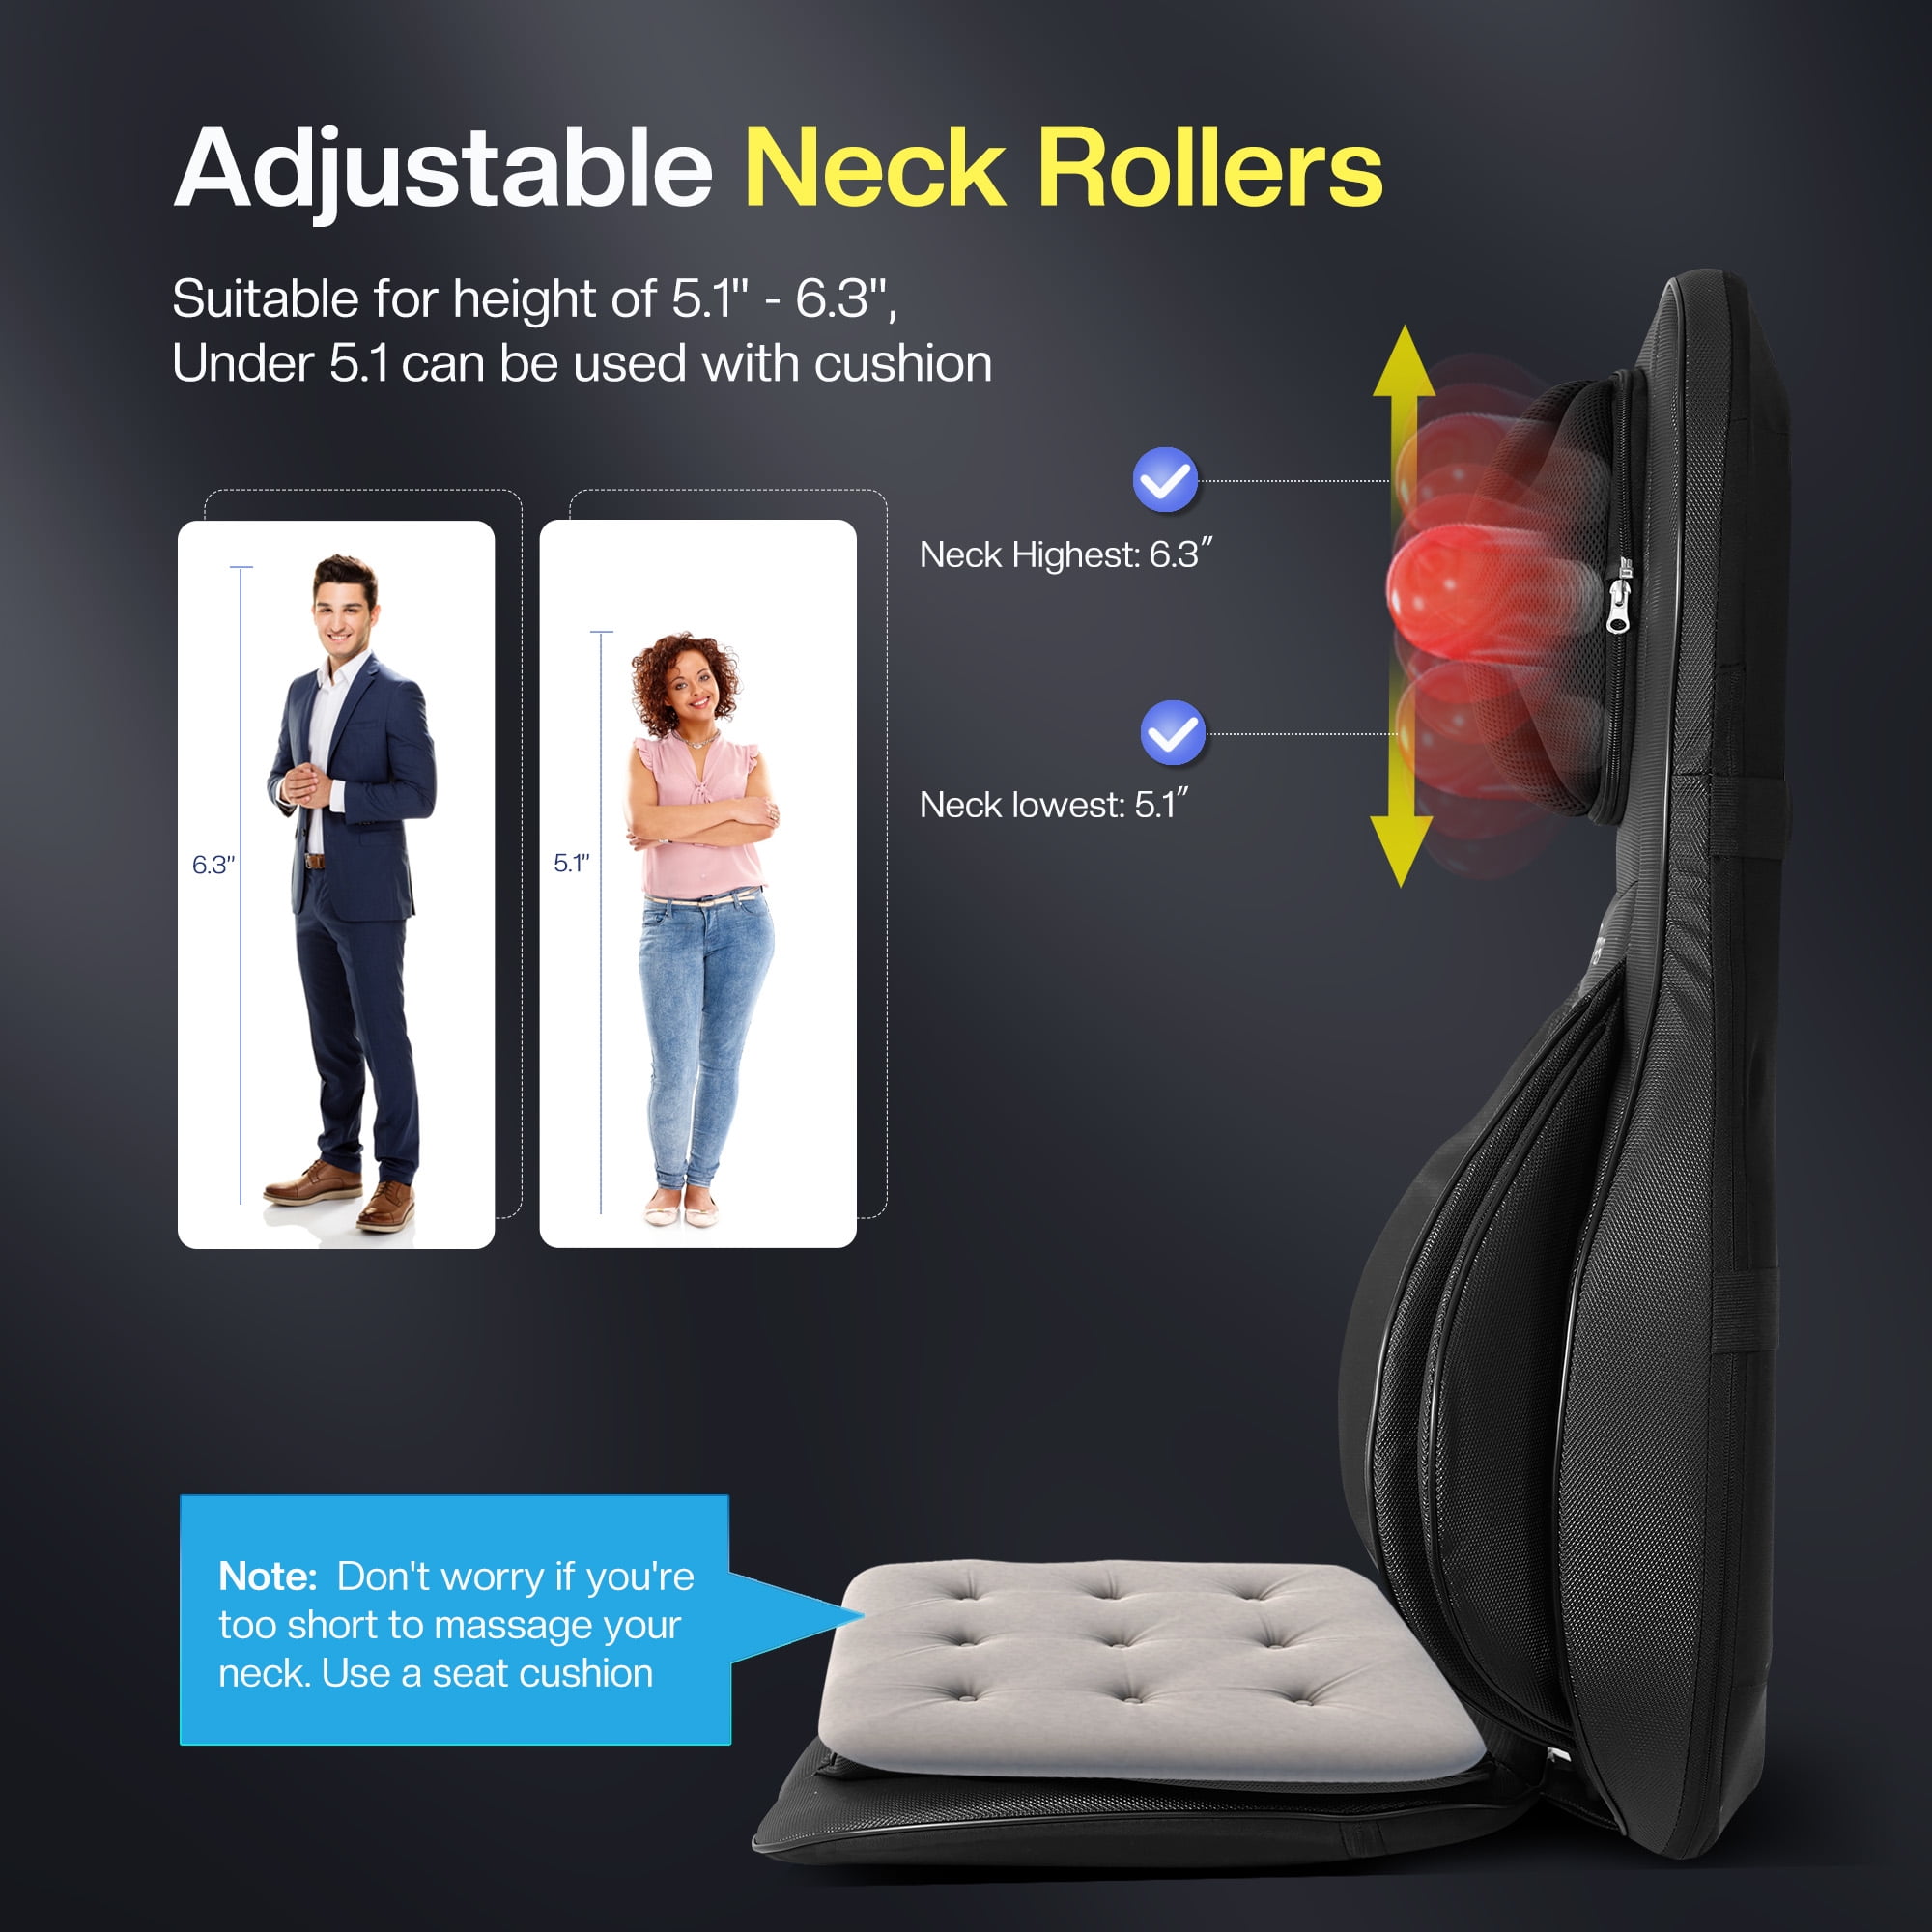 Comfier Vibration Massage Seat Cushion Back Massager with Heat Chair Pad  Gifts for Men/Dad